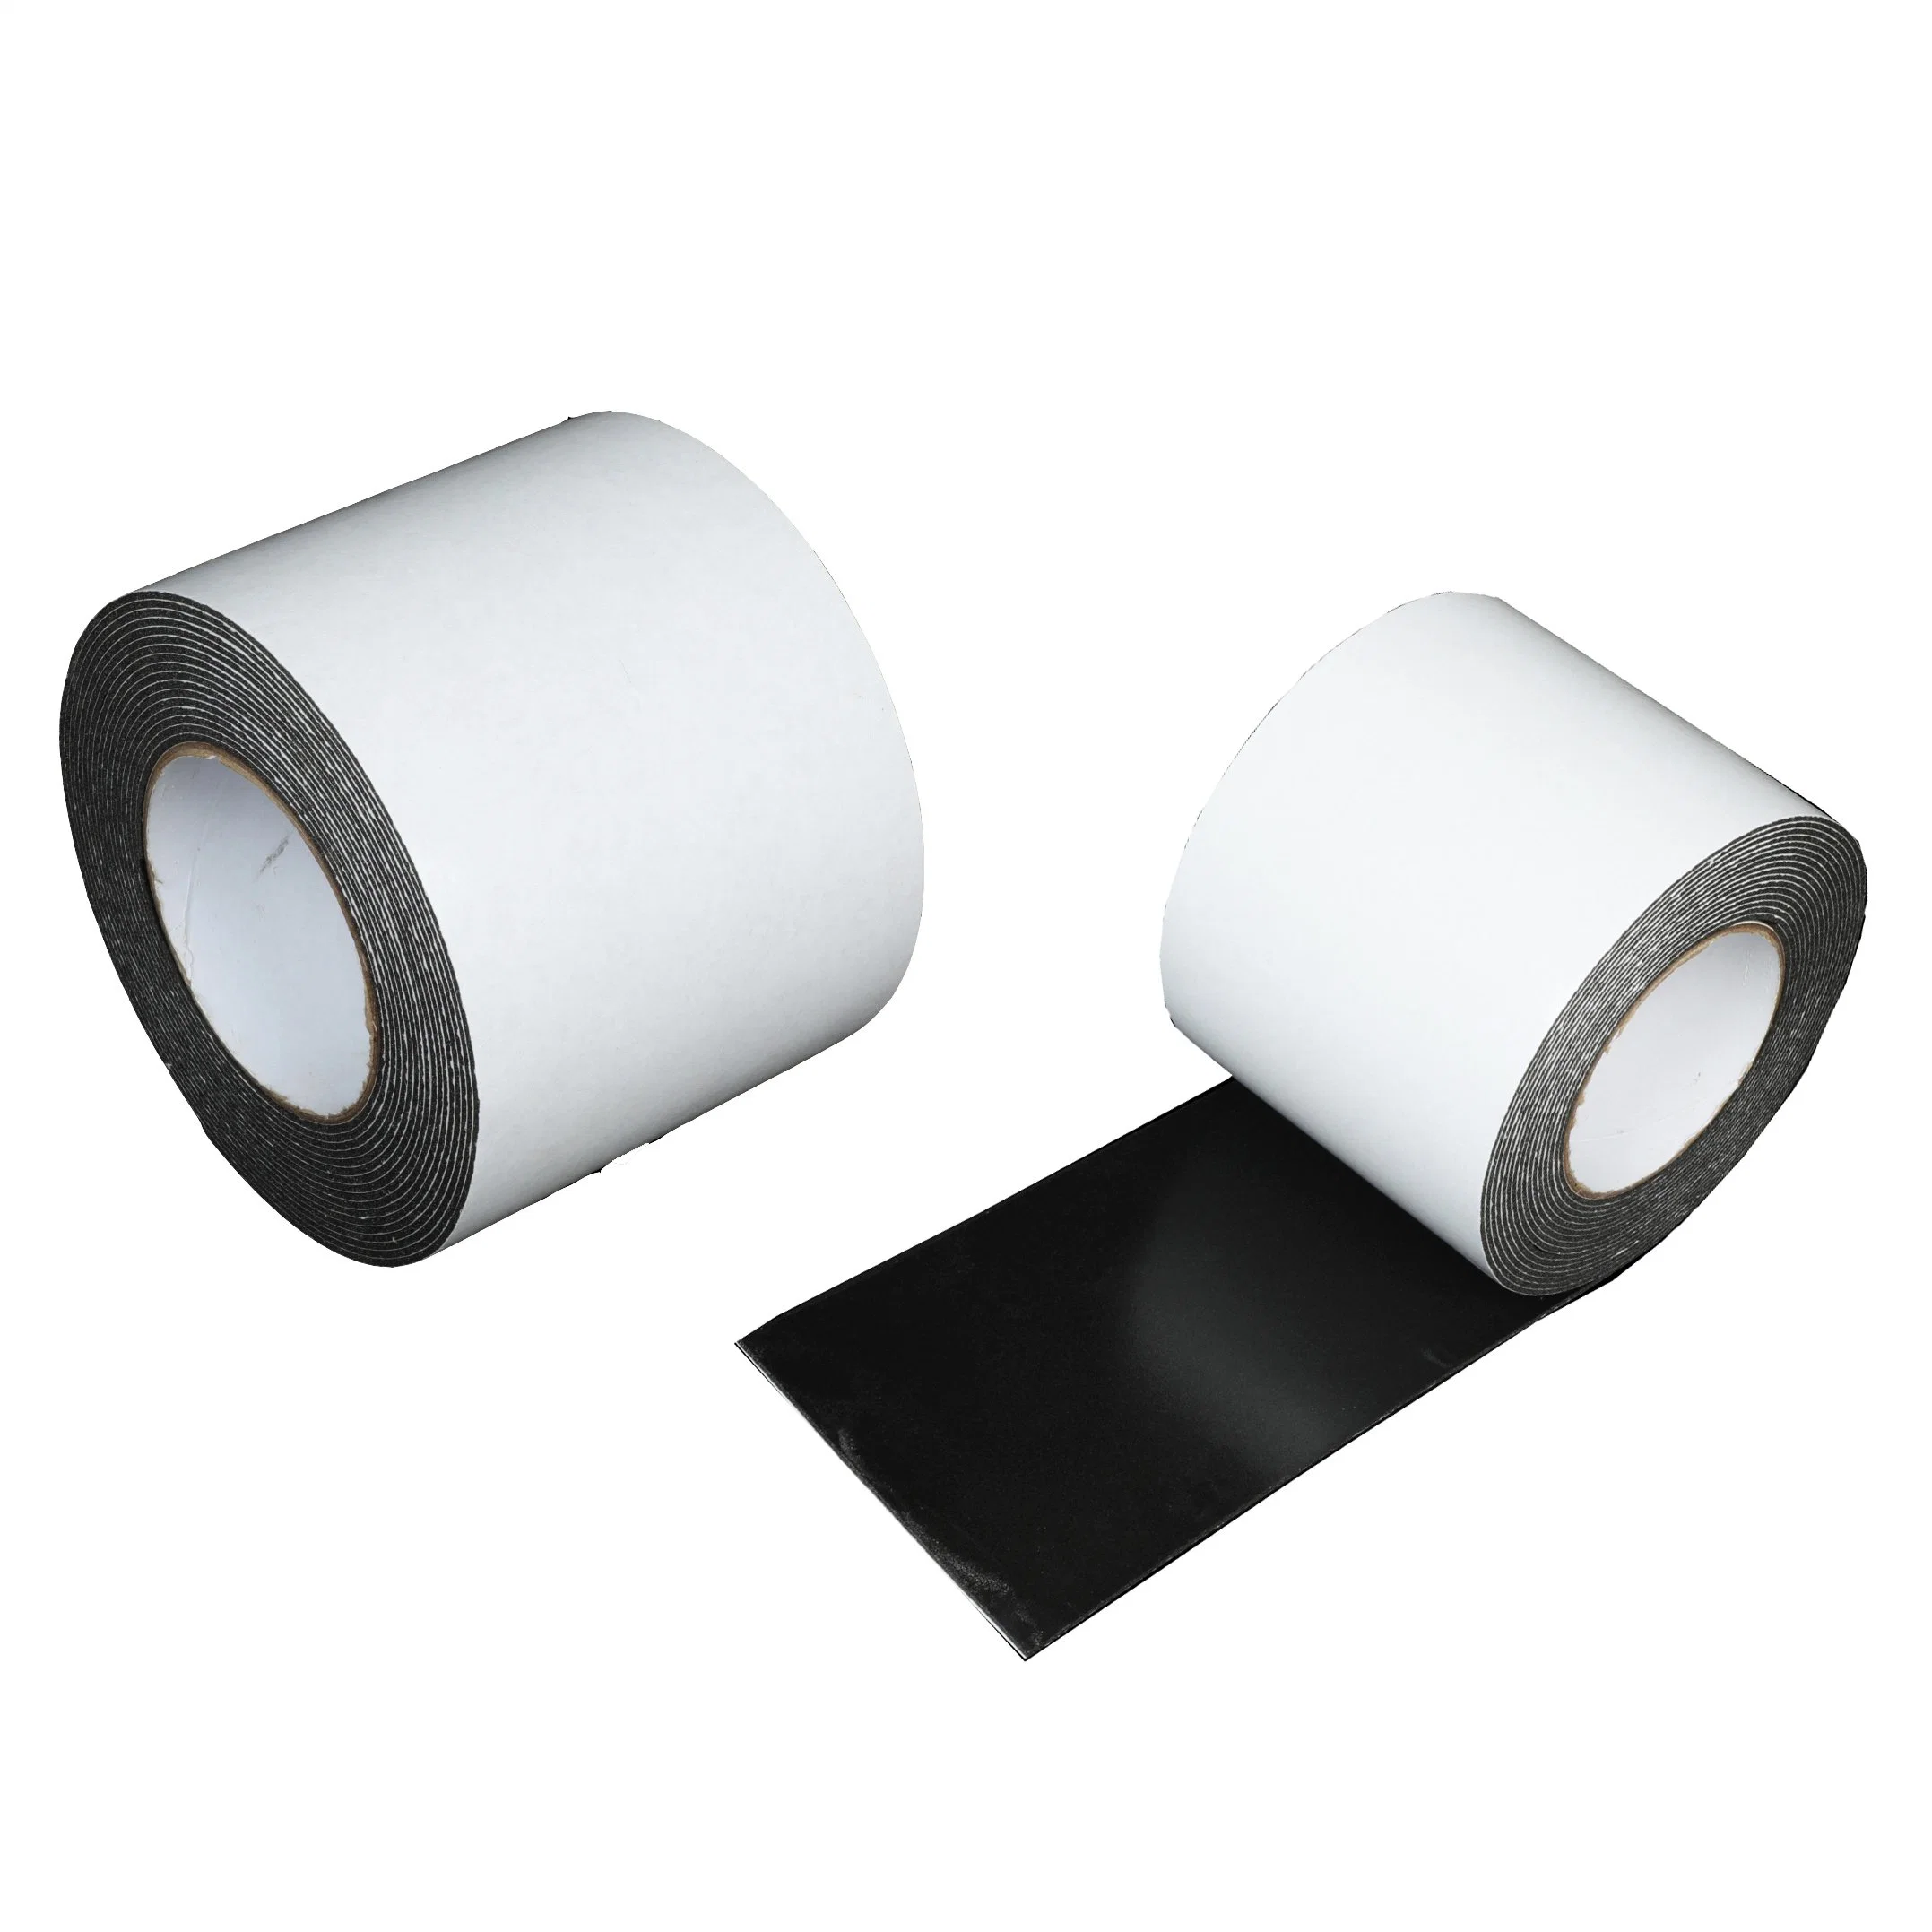 High quality/High cost performance  Acrylic Double Side PE/EVA Waterproof Foam Tape PE Foam Tape Double Sided Solvent Acrylic Self Adhesive